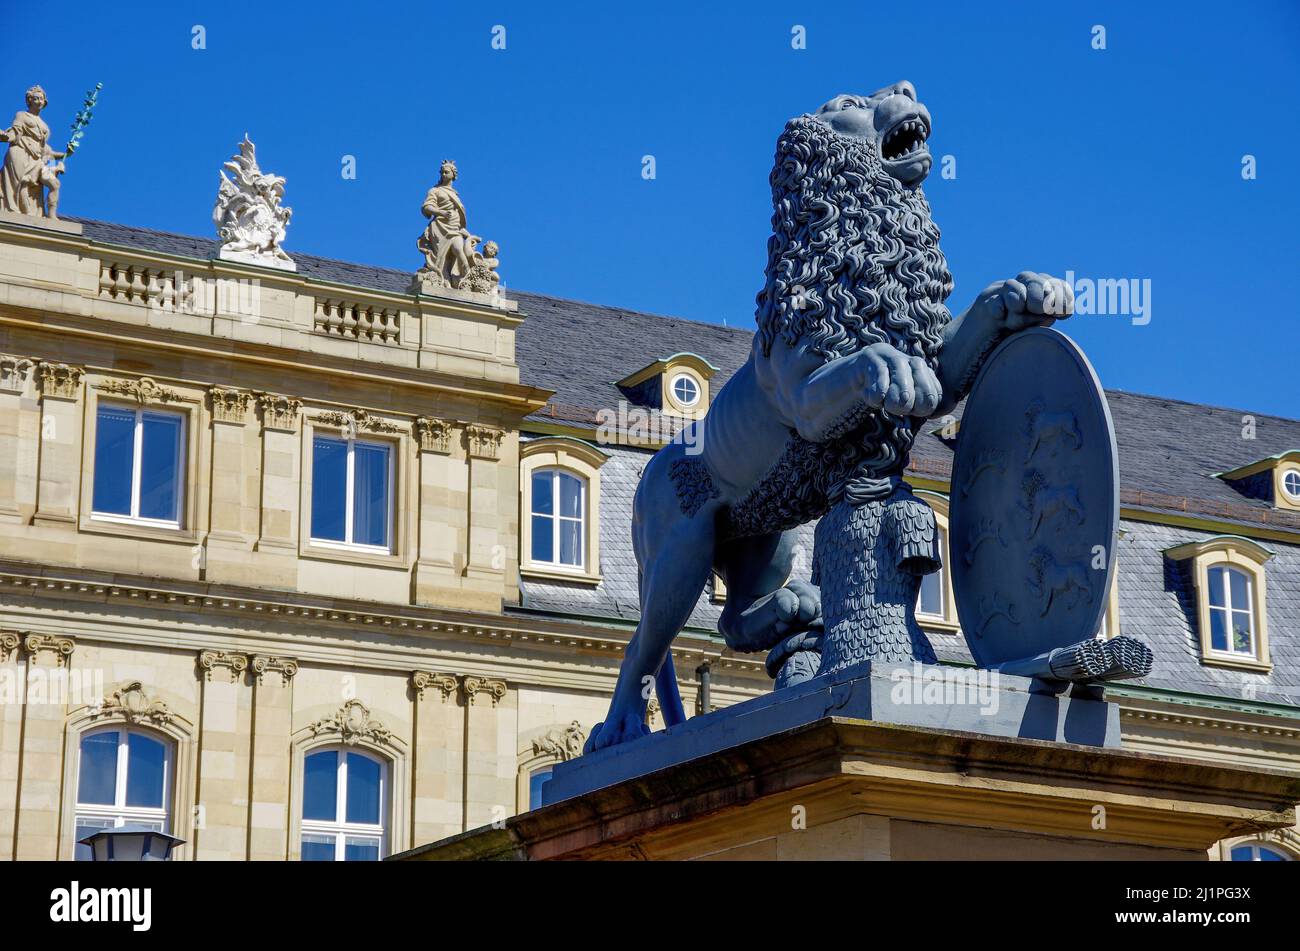 Stuttgart, Baden-Württemberg, Germany: Life-size statue of a lion at the entrance to the courtyard of the New Palace (Neues Schloss). Stock Photo